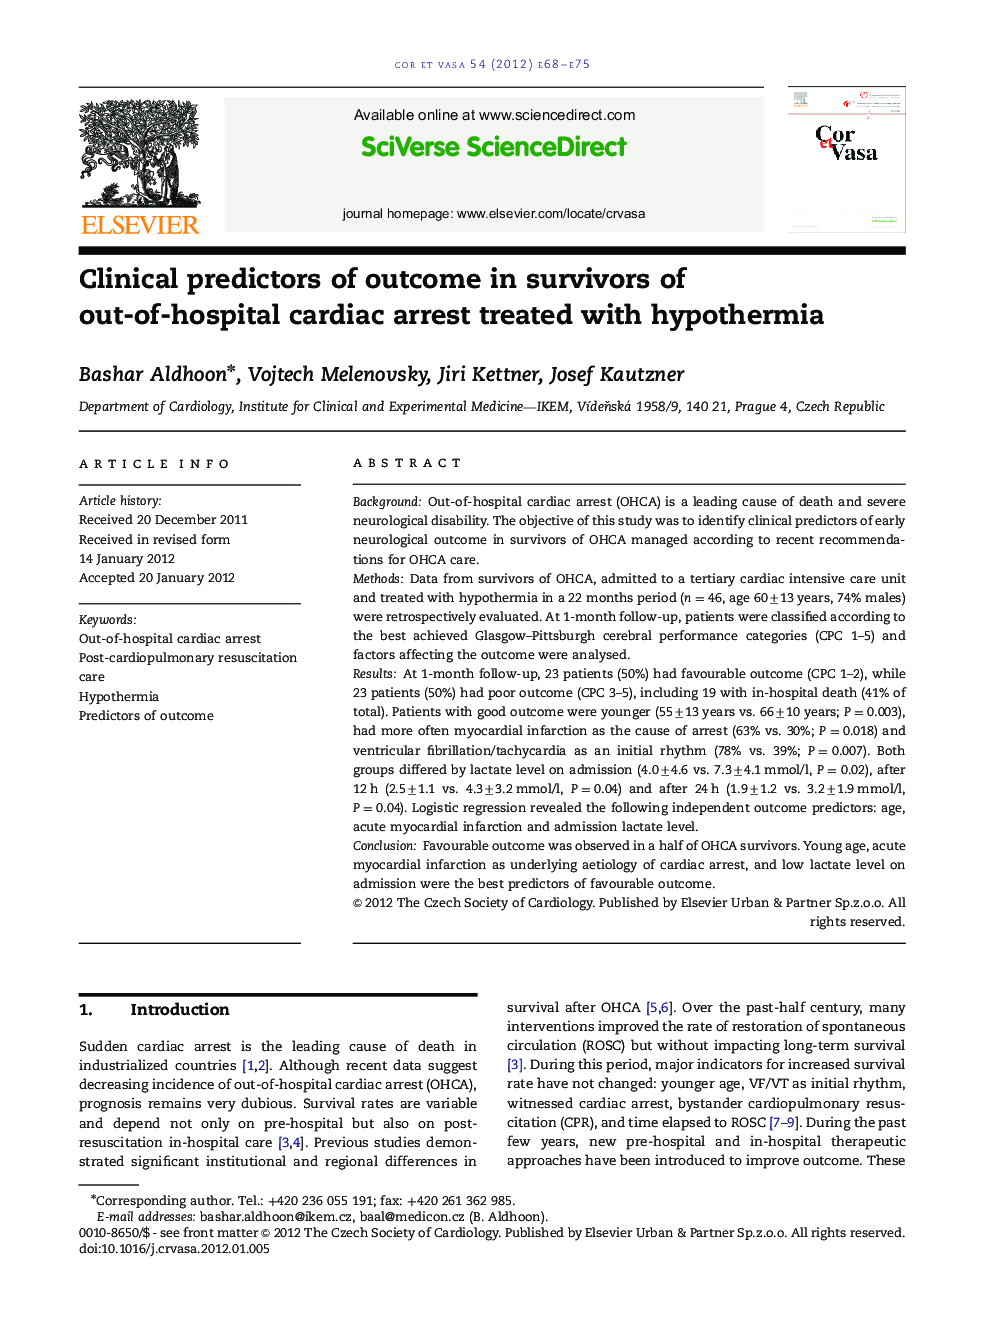 Clinical predictors of outcome in survivors of out-of-hospital cardiac arrest treated with hypothermia